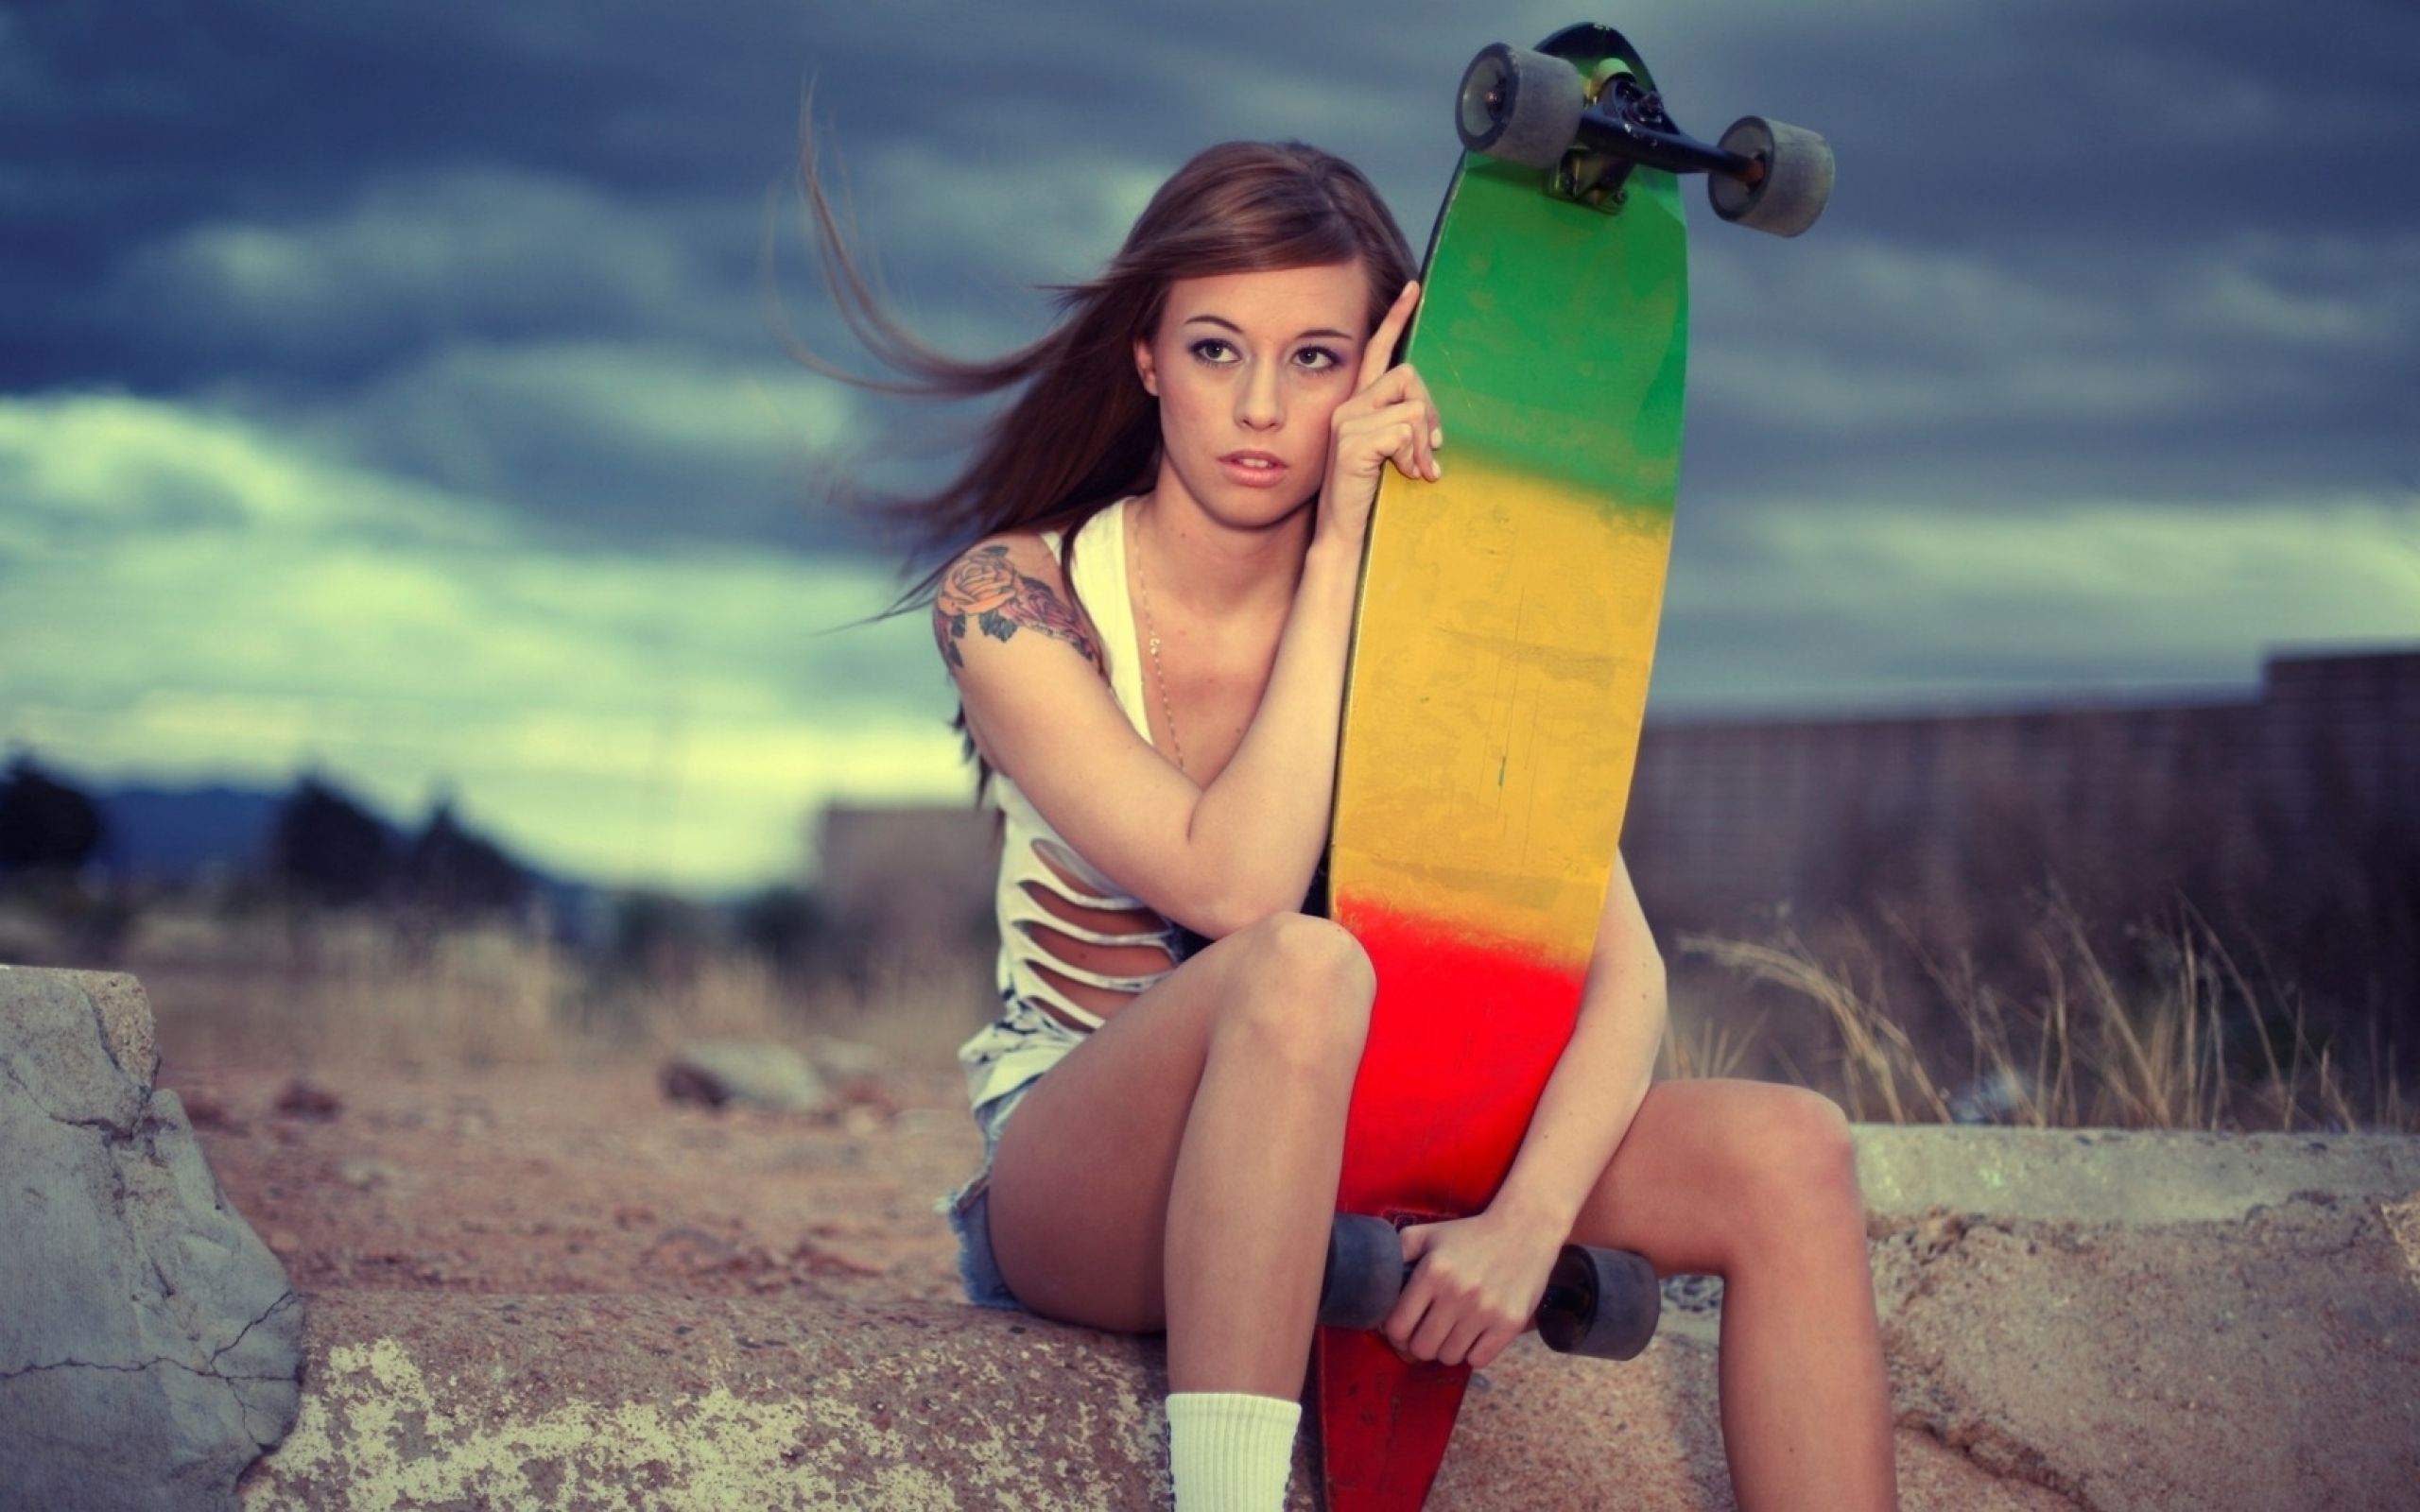 Sporty girl and skateboard wallpapers and images - wallpapers